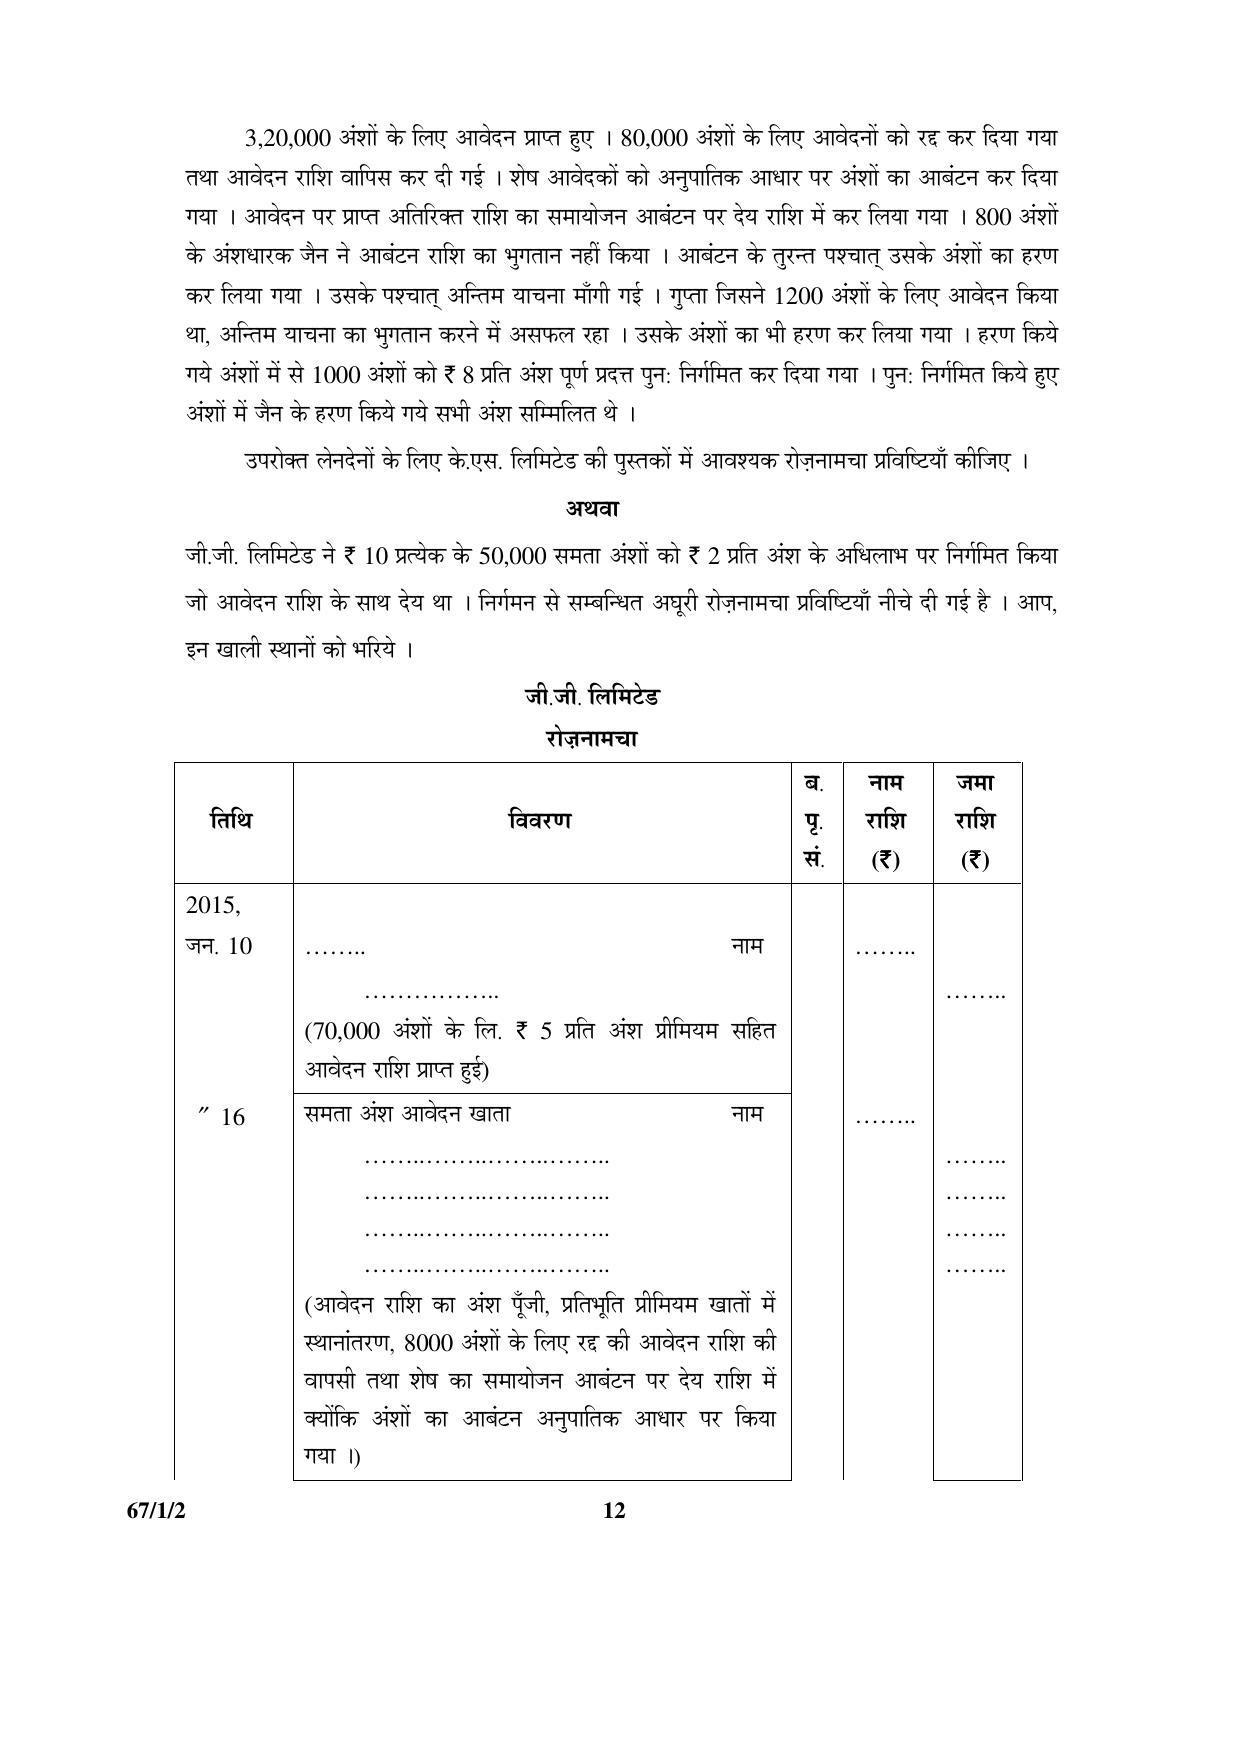 CBSE Class 12 67-1-2 ACCOUNTANCY 2016 Question Paper - Page 12